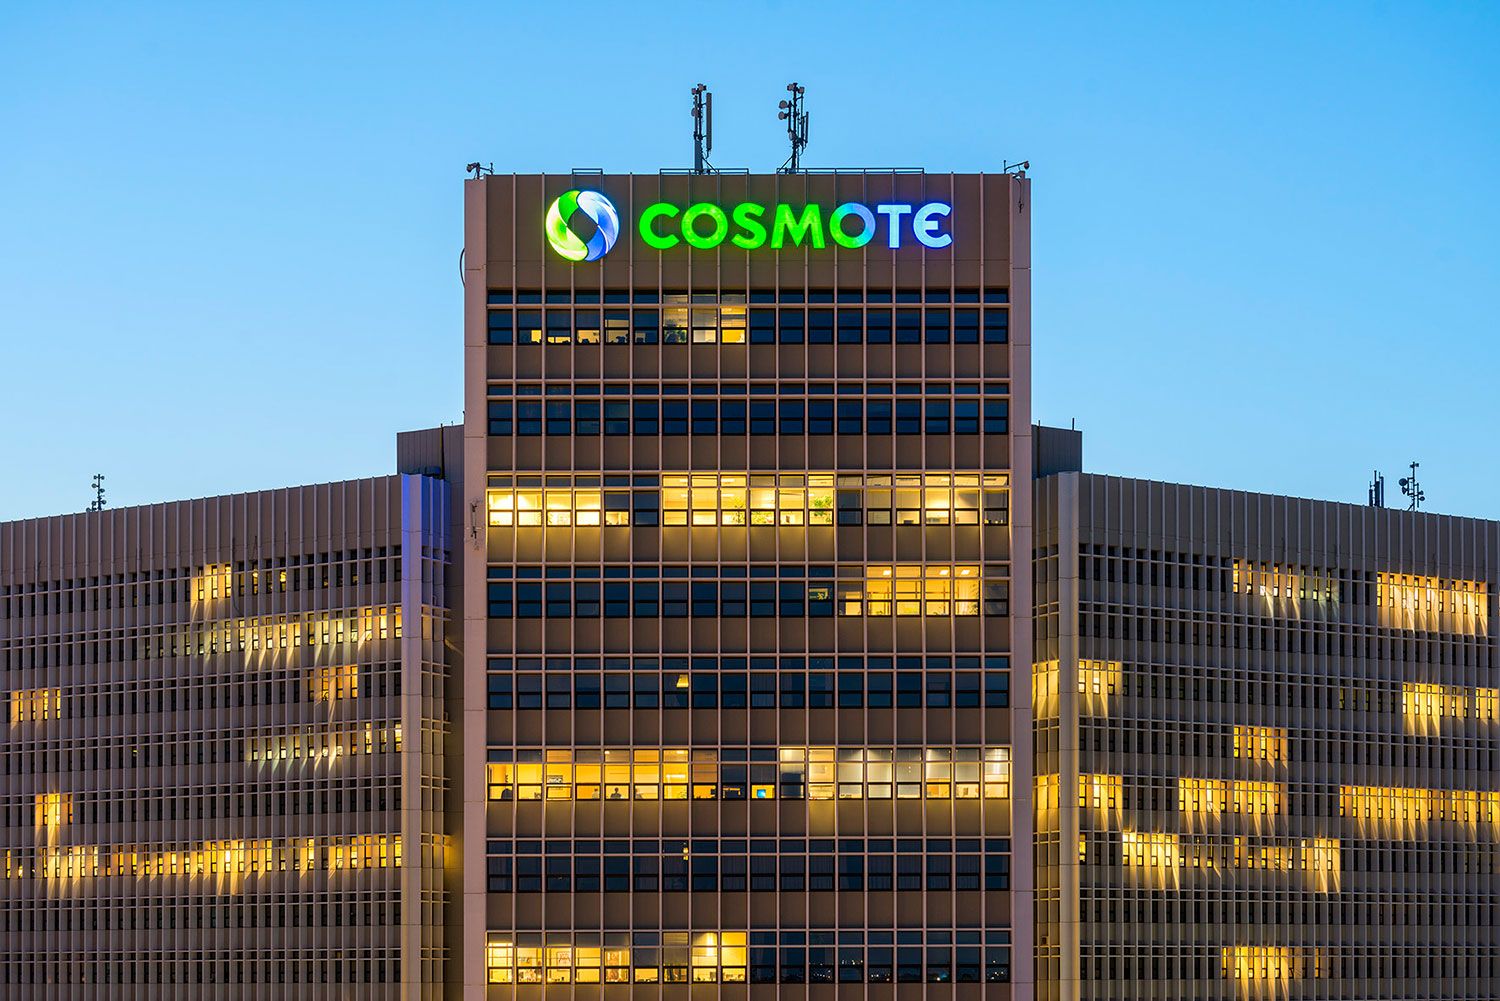 Cosmote’s uproar and sudden decision: The discount they were giving everyone is over